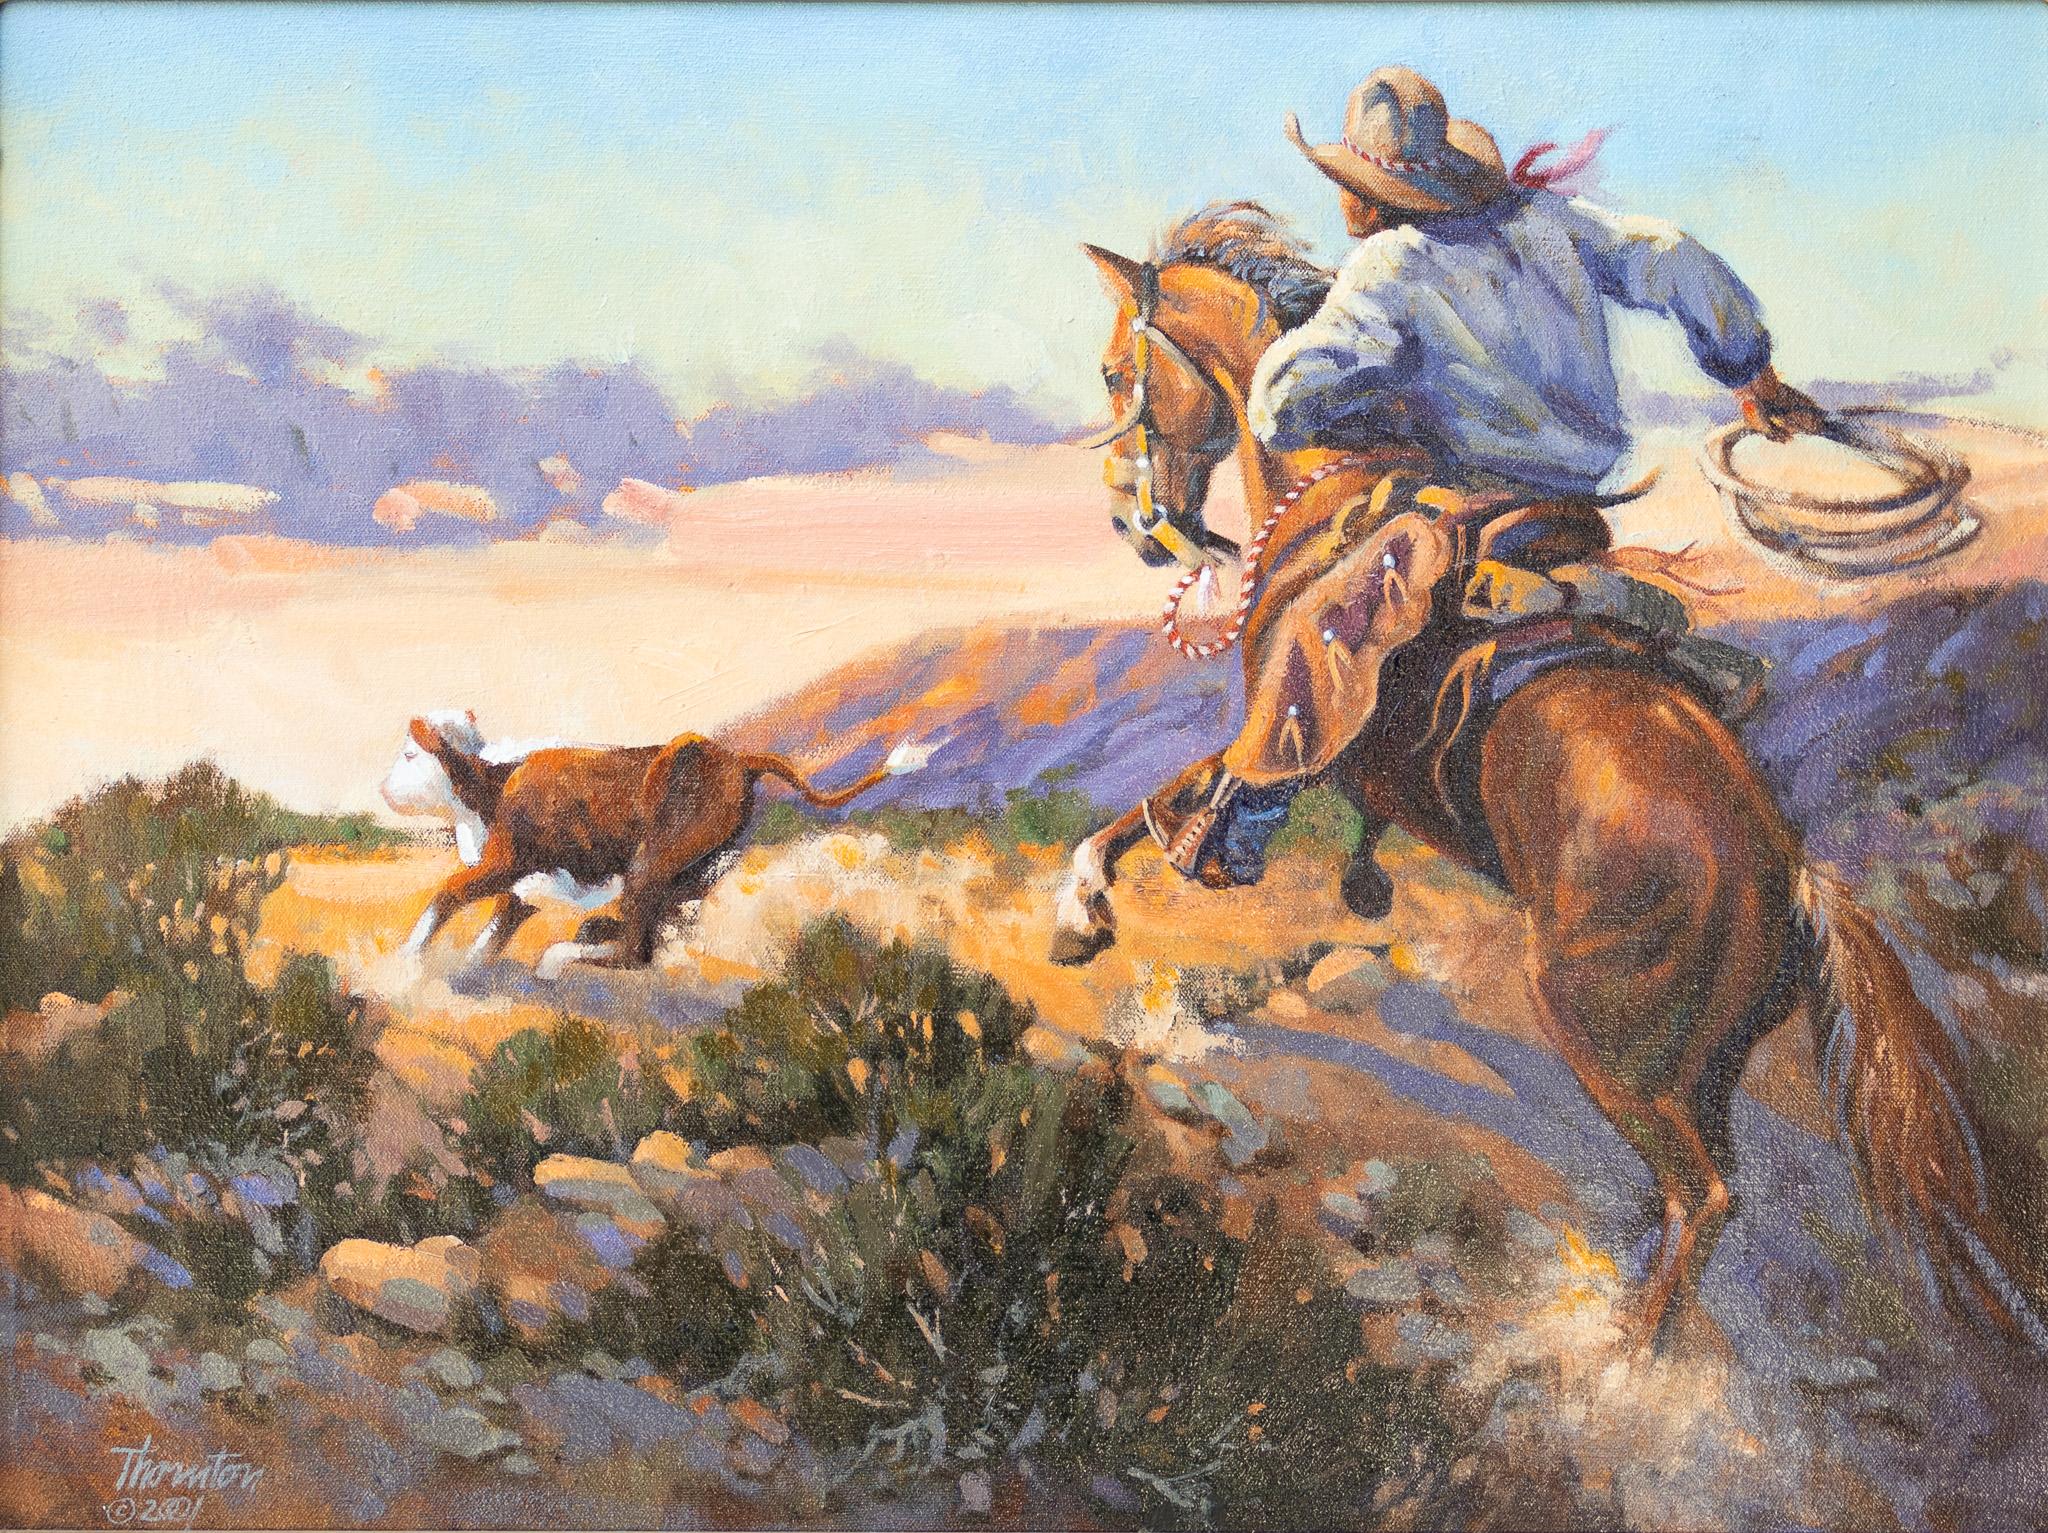 Gary Jack Thornton Figurative Painting - "Last Stray O' The Day" American Western Painting with Cowboy Horse Cow Lasso